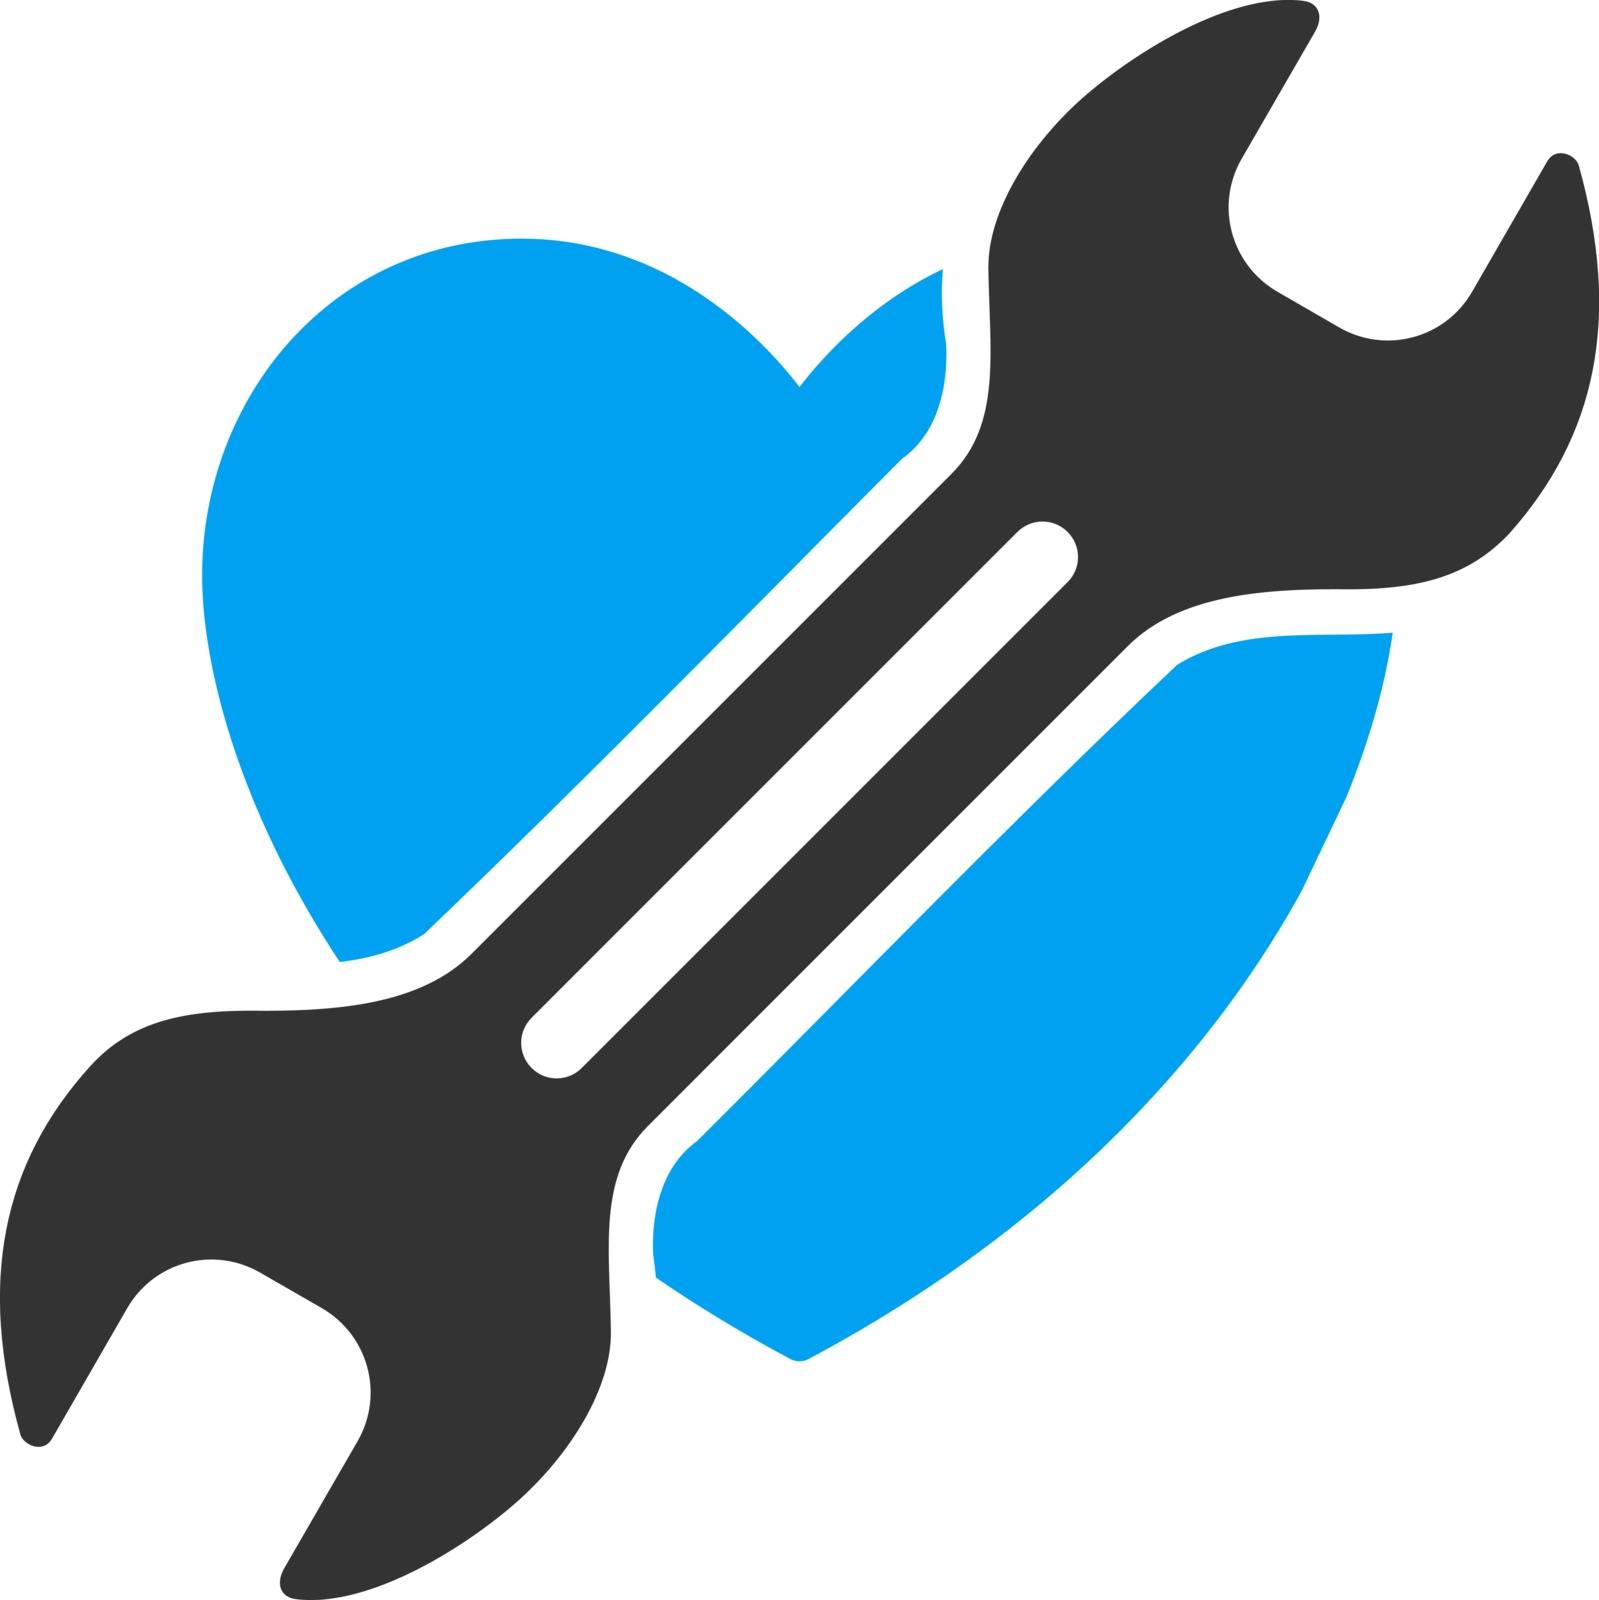 Heart Surgery Icon by ahasoft